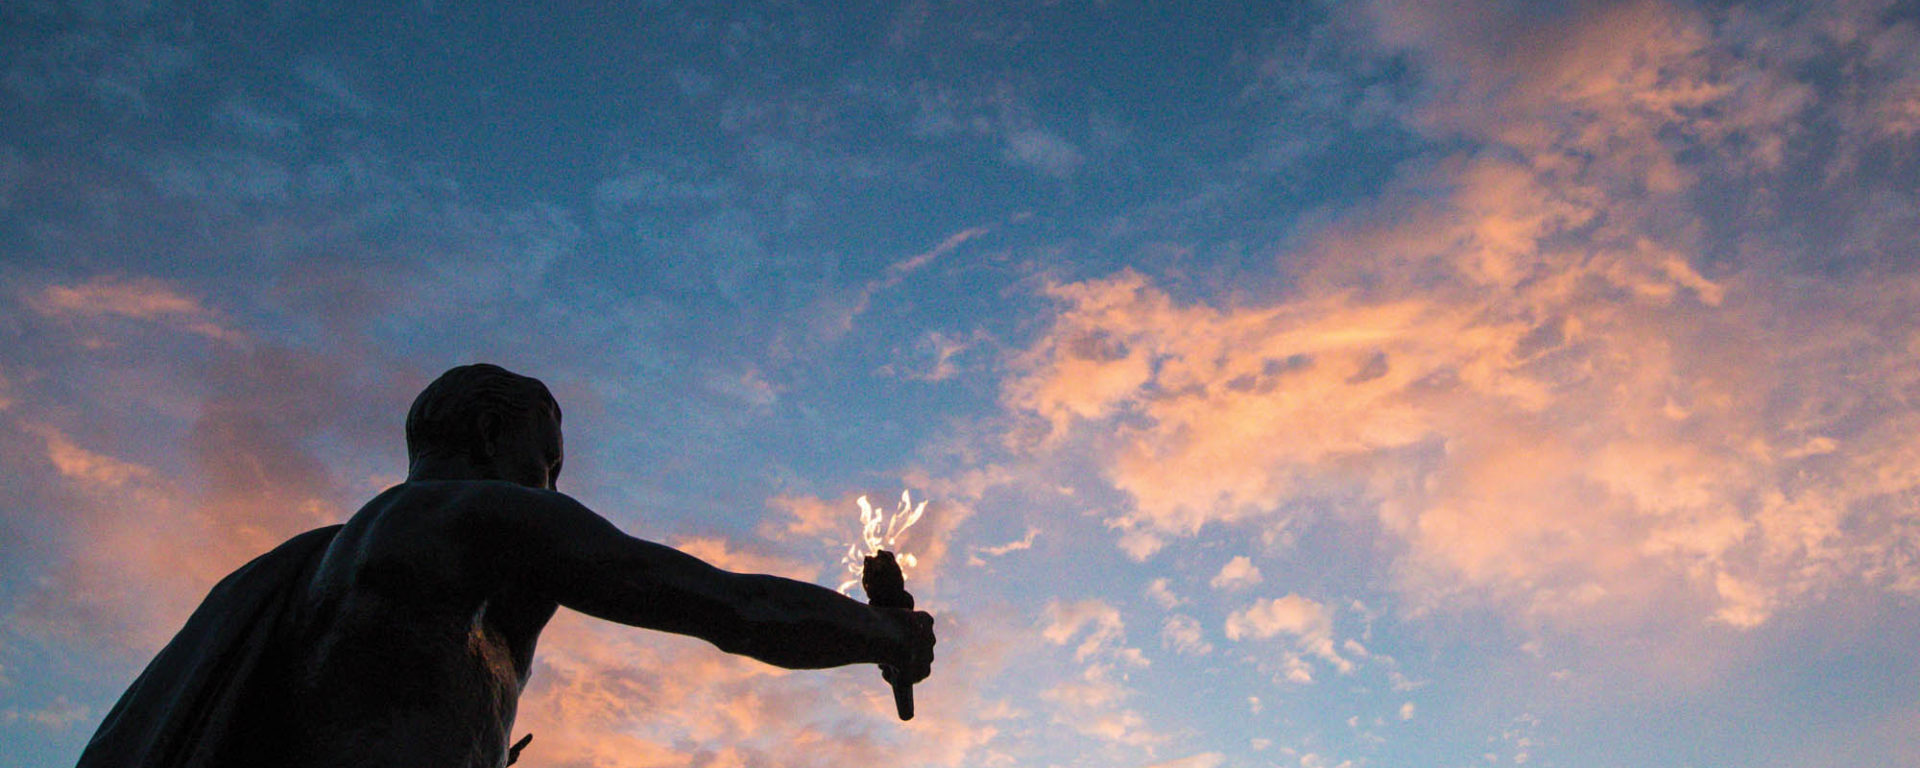 The Torchbearer shines bright during a recent sunset in Knoxville.